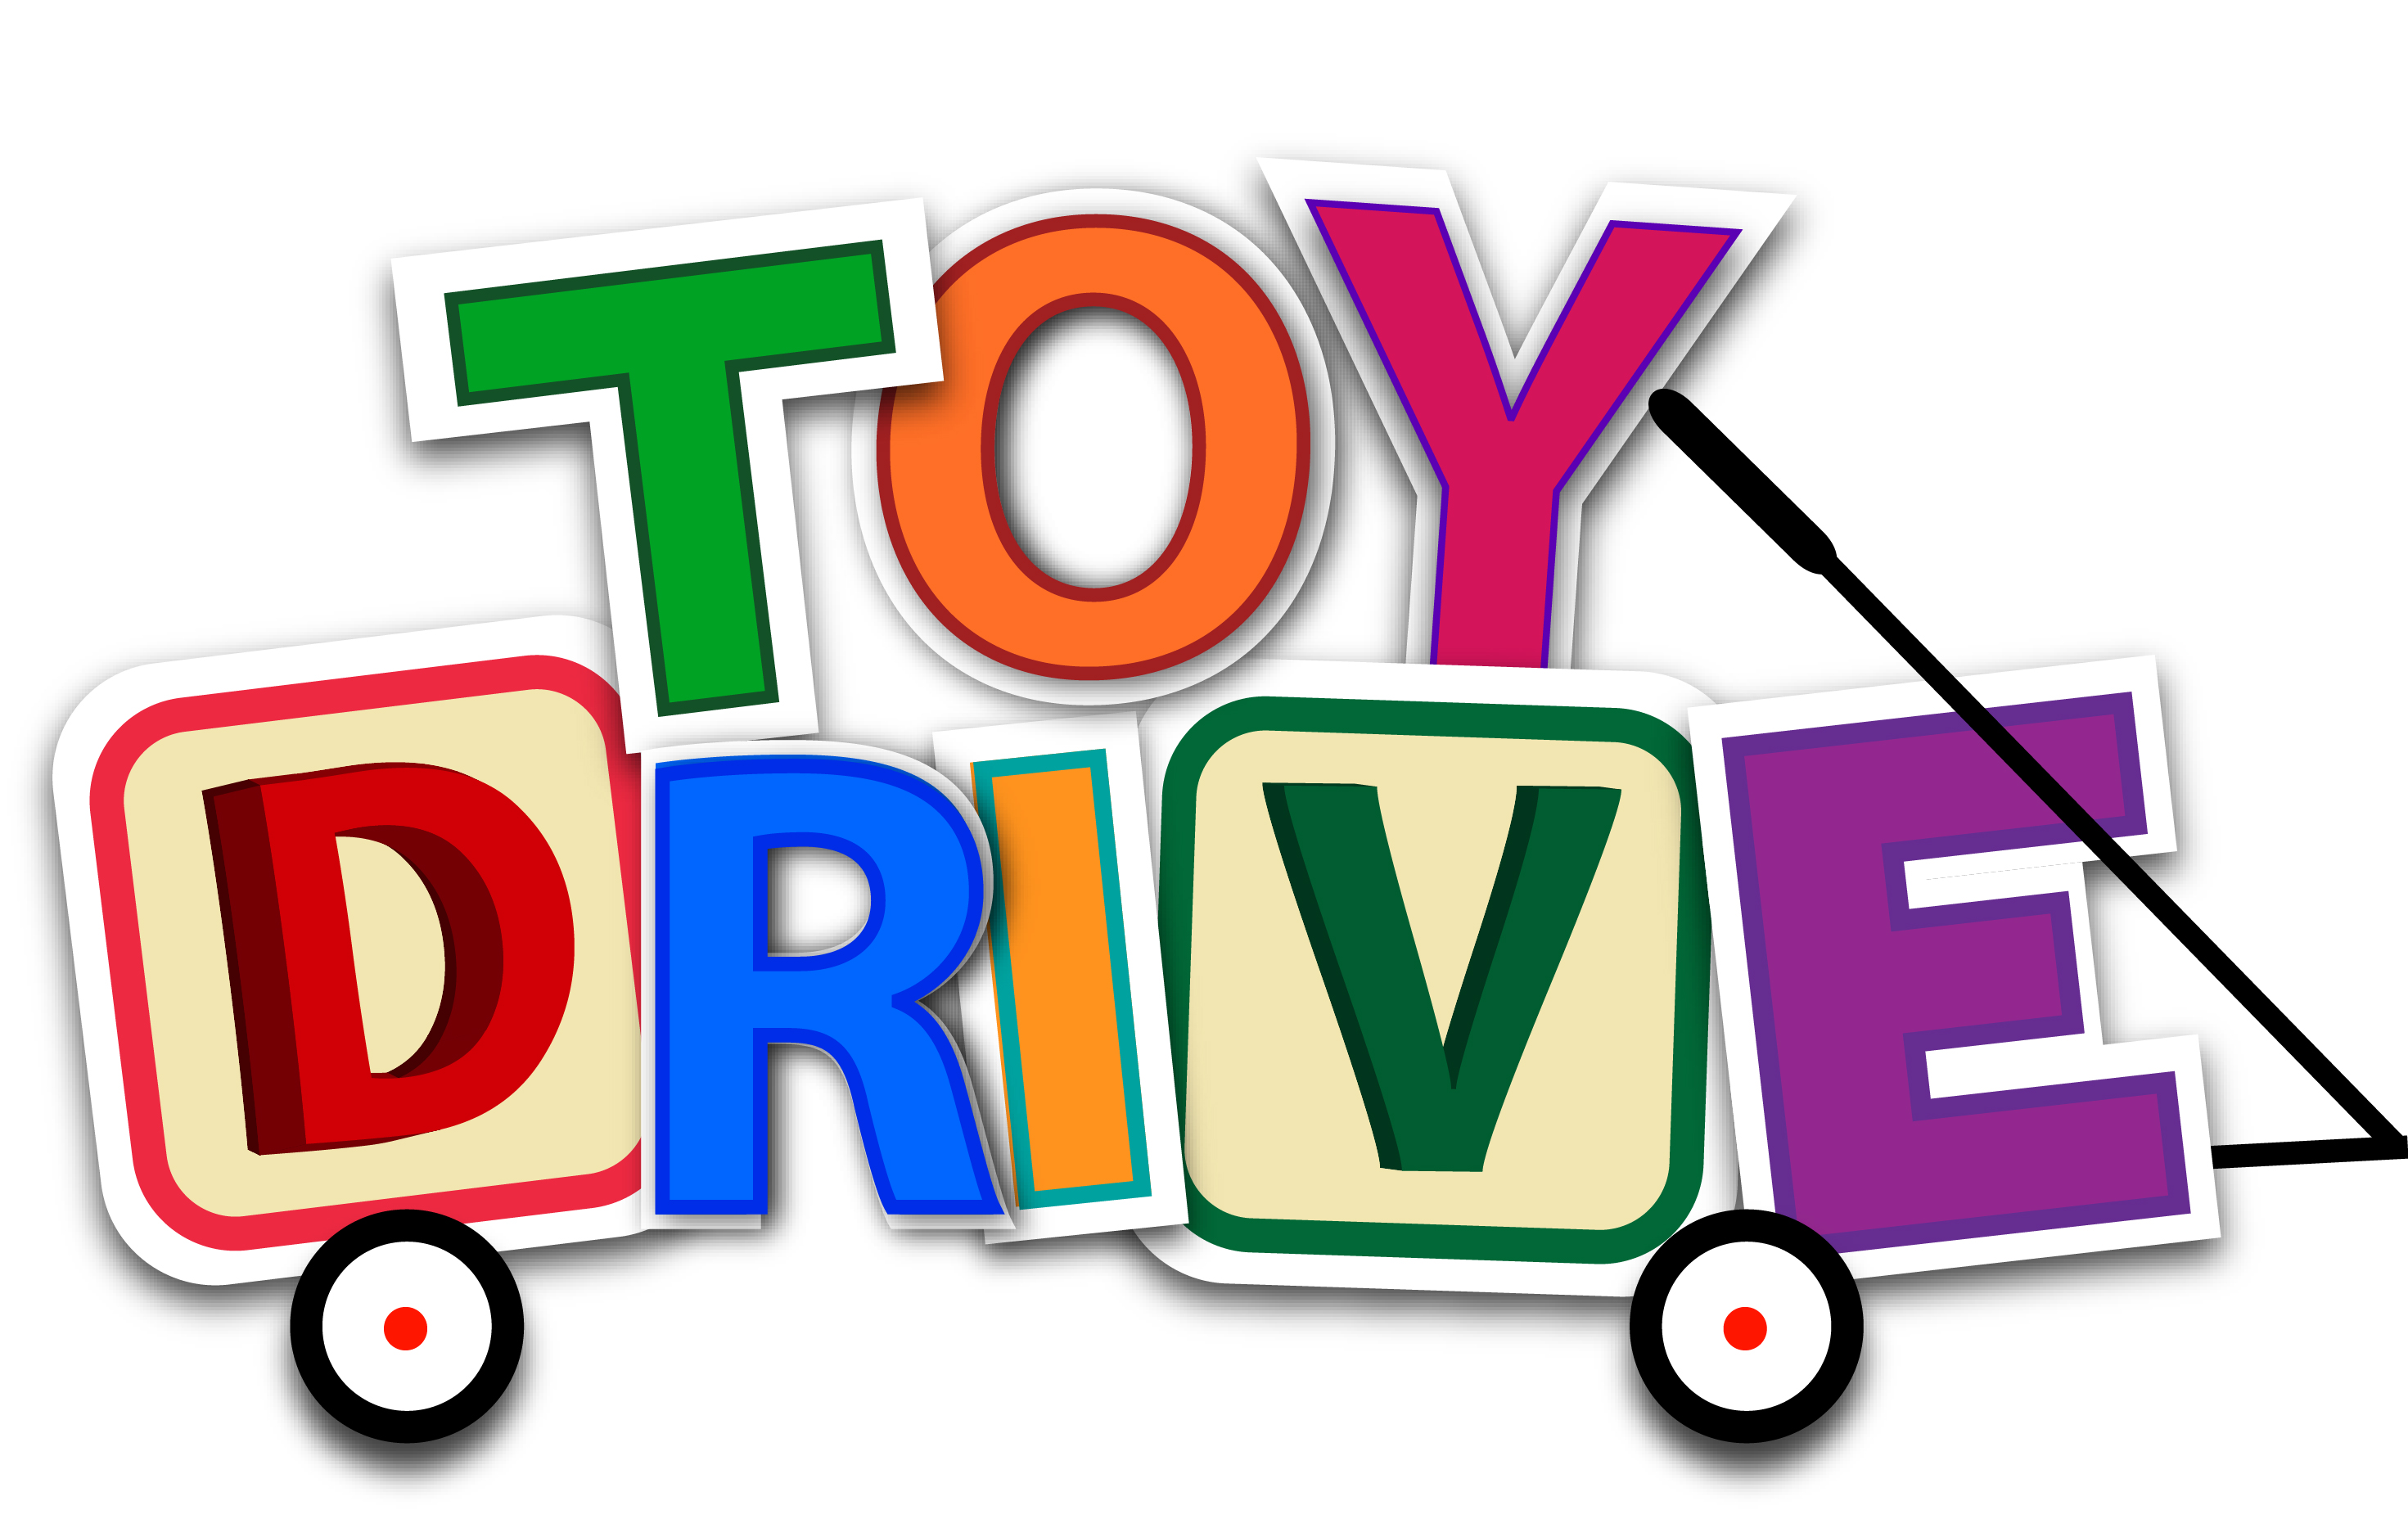 toys for tots clipart - photo #45